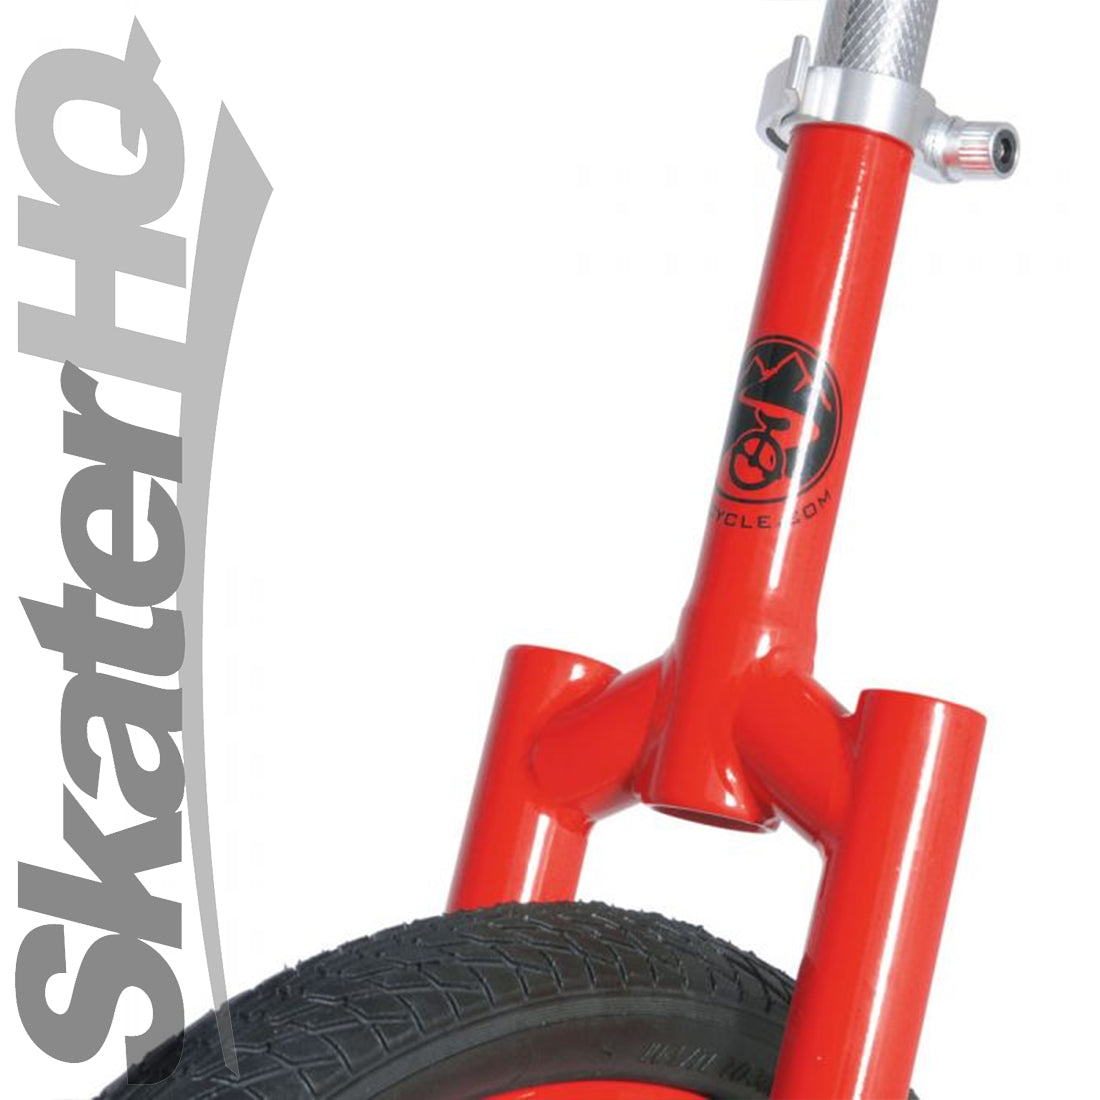 Leaf 20inch Unicycle - Red Other Fun Toys